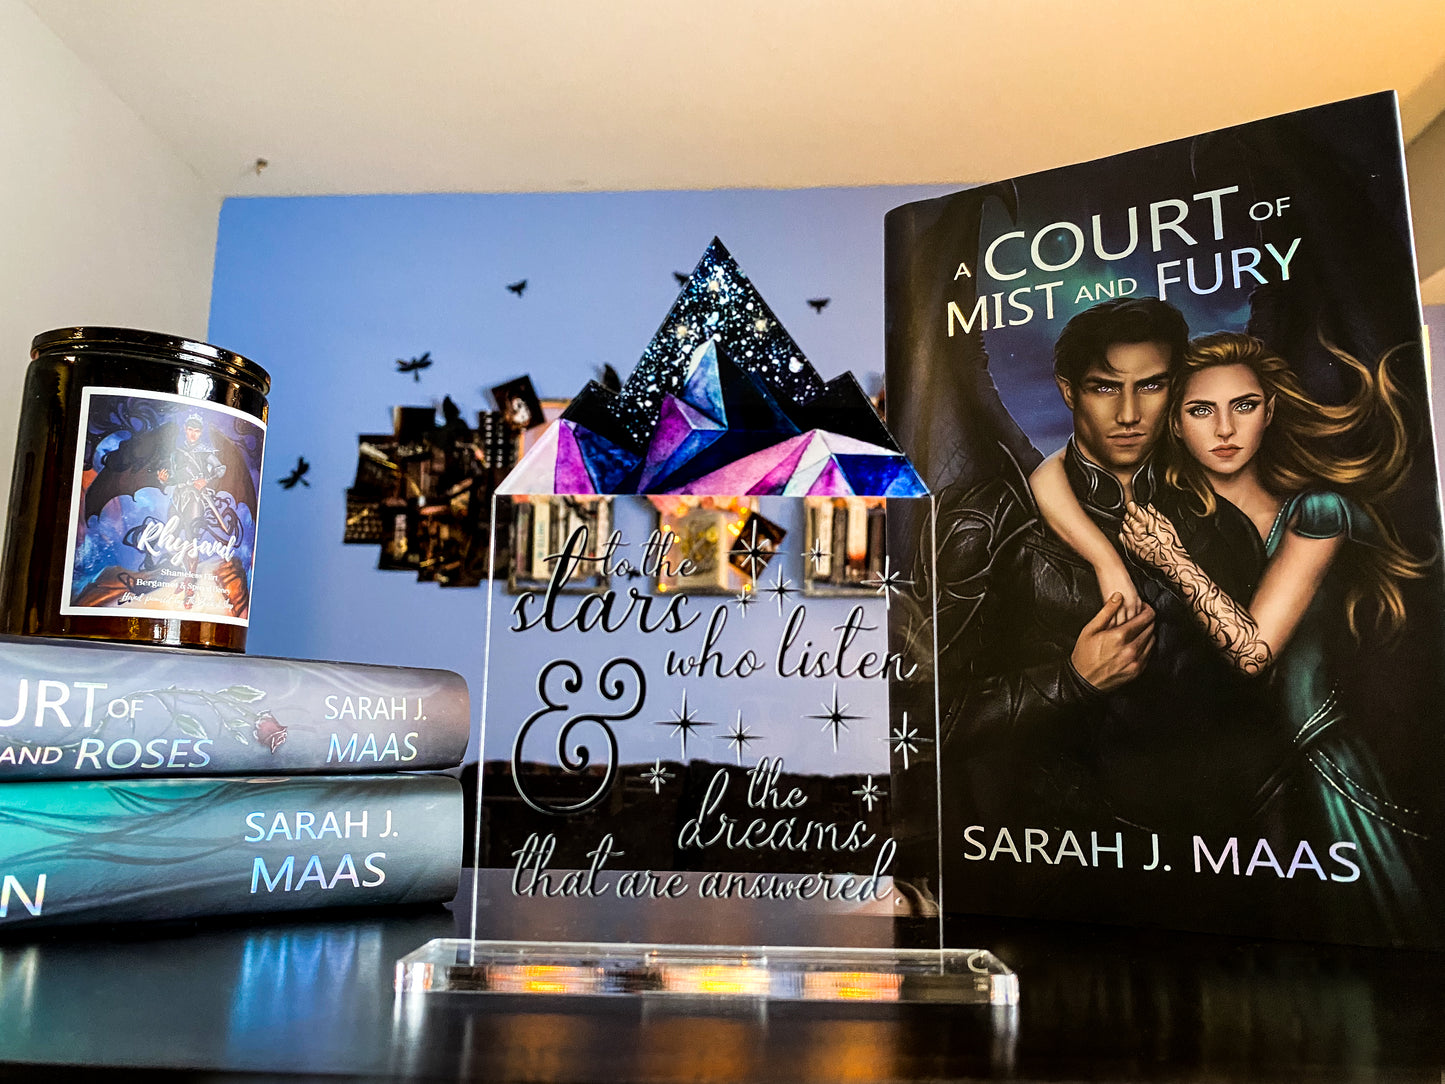 "To the stars who listen and the dreams that are answered." - A Court of Thorns and Roses Series / A Court of Mist and Fury - Freestanding Bookshelf / Desktop Acrylic Accessory - Officially licensed by Sarah J. Maas - D8